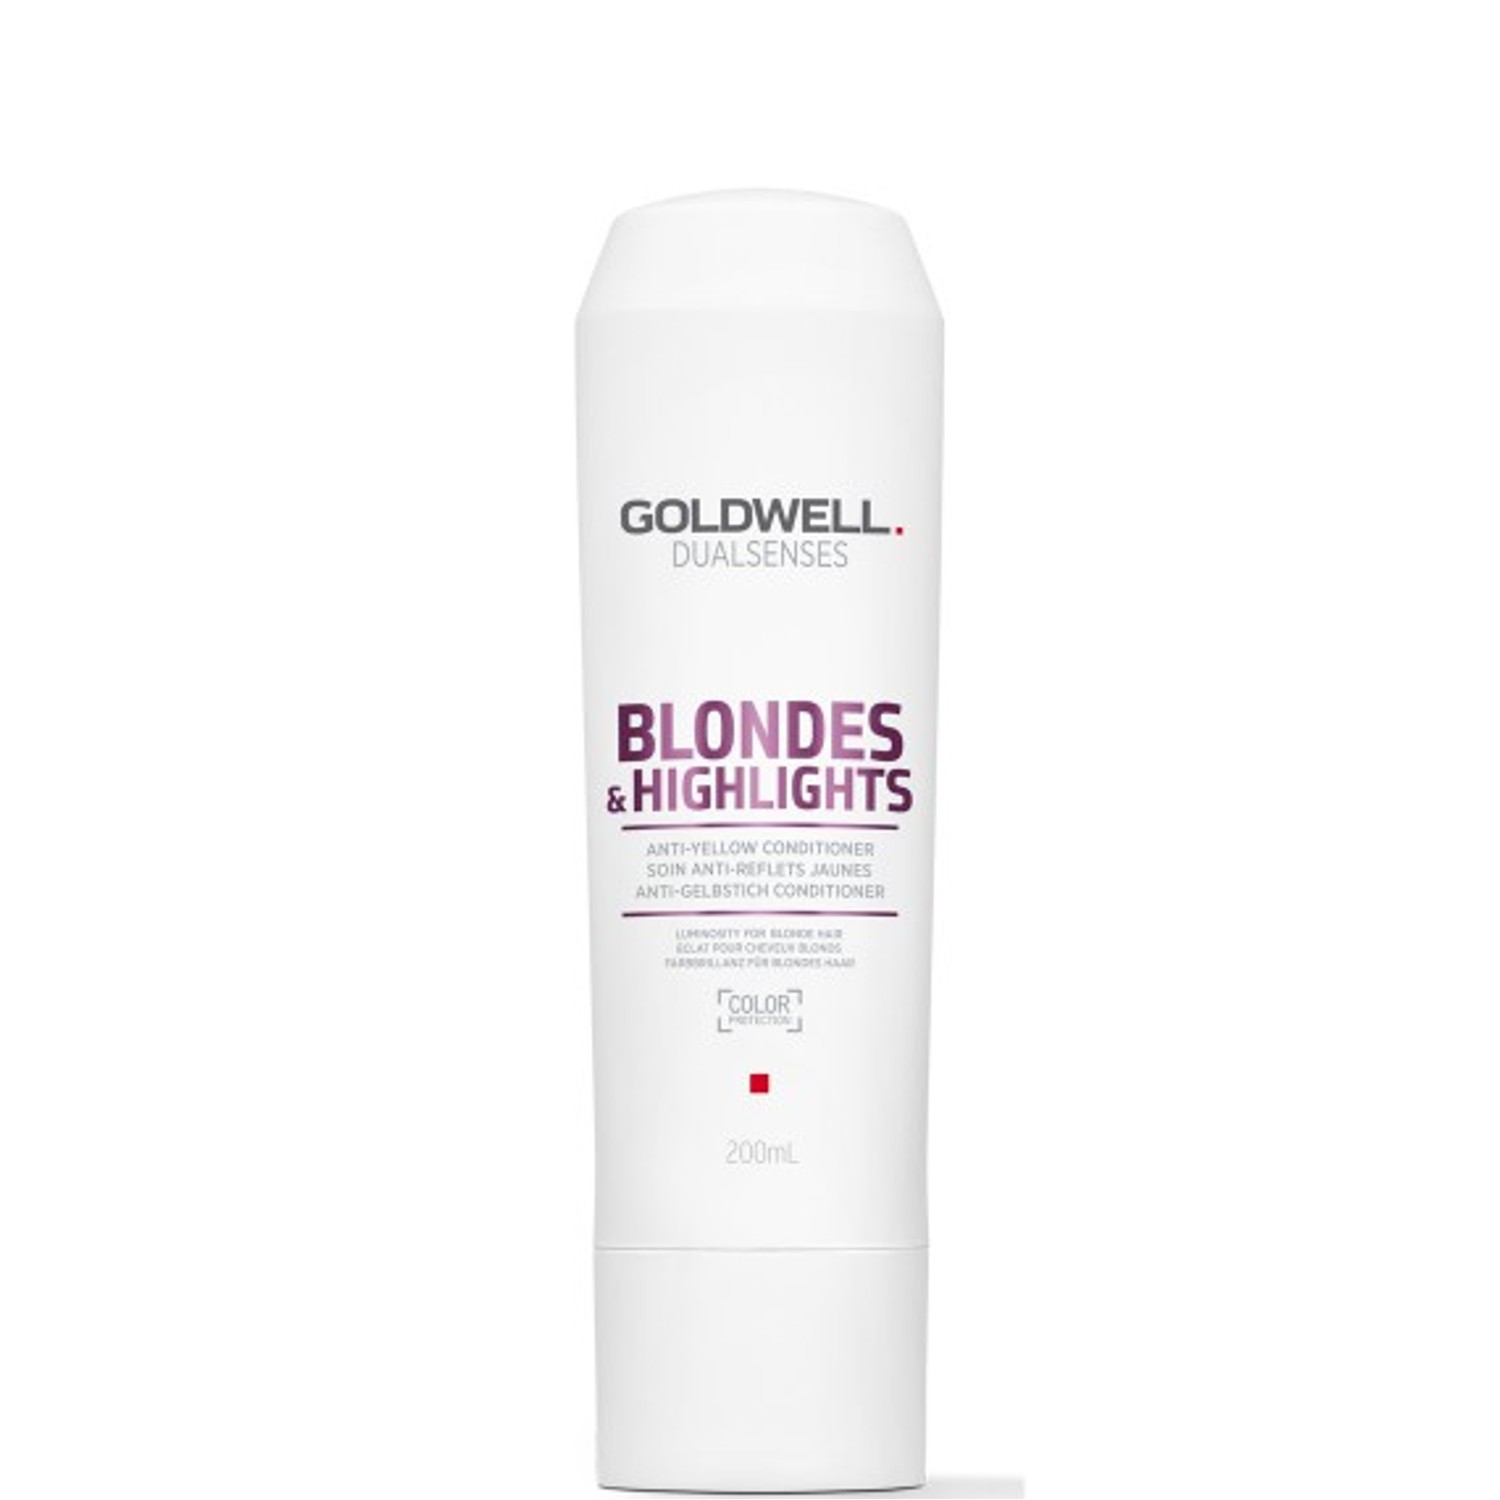 GOLDWELL Dualsenses Blondes & Highlights Anti-Yellow Conditioner 200 ml